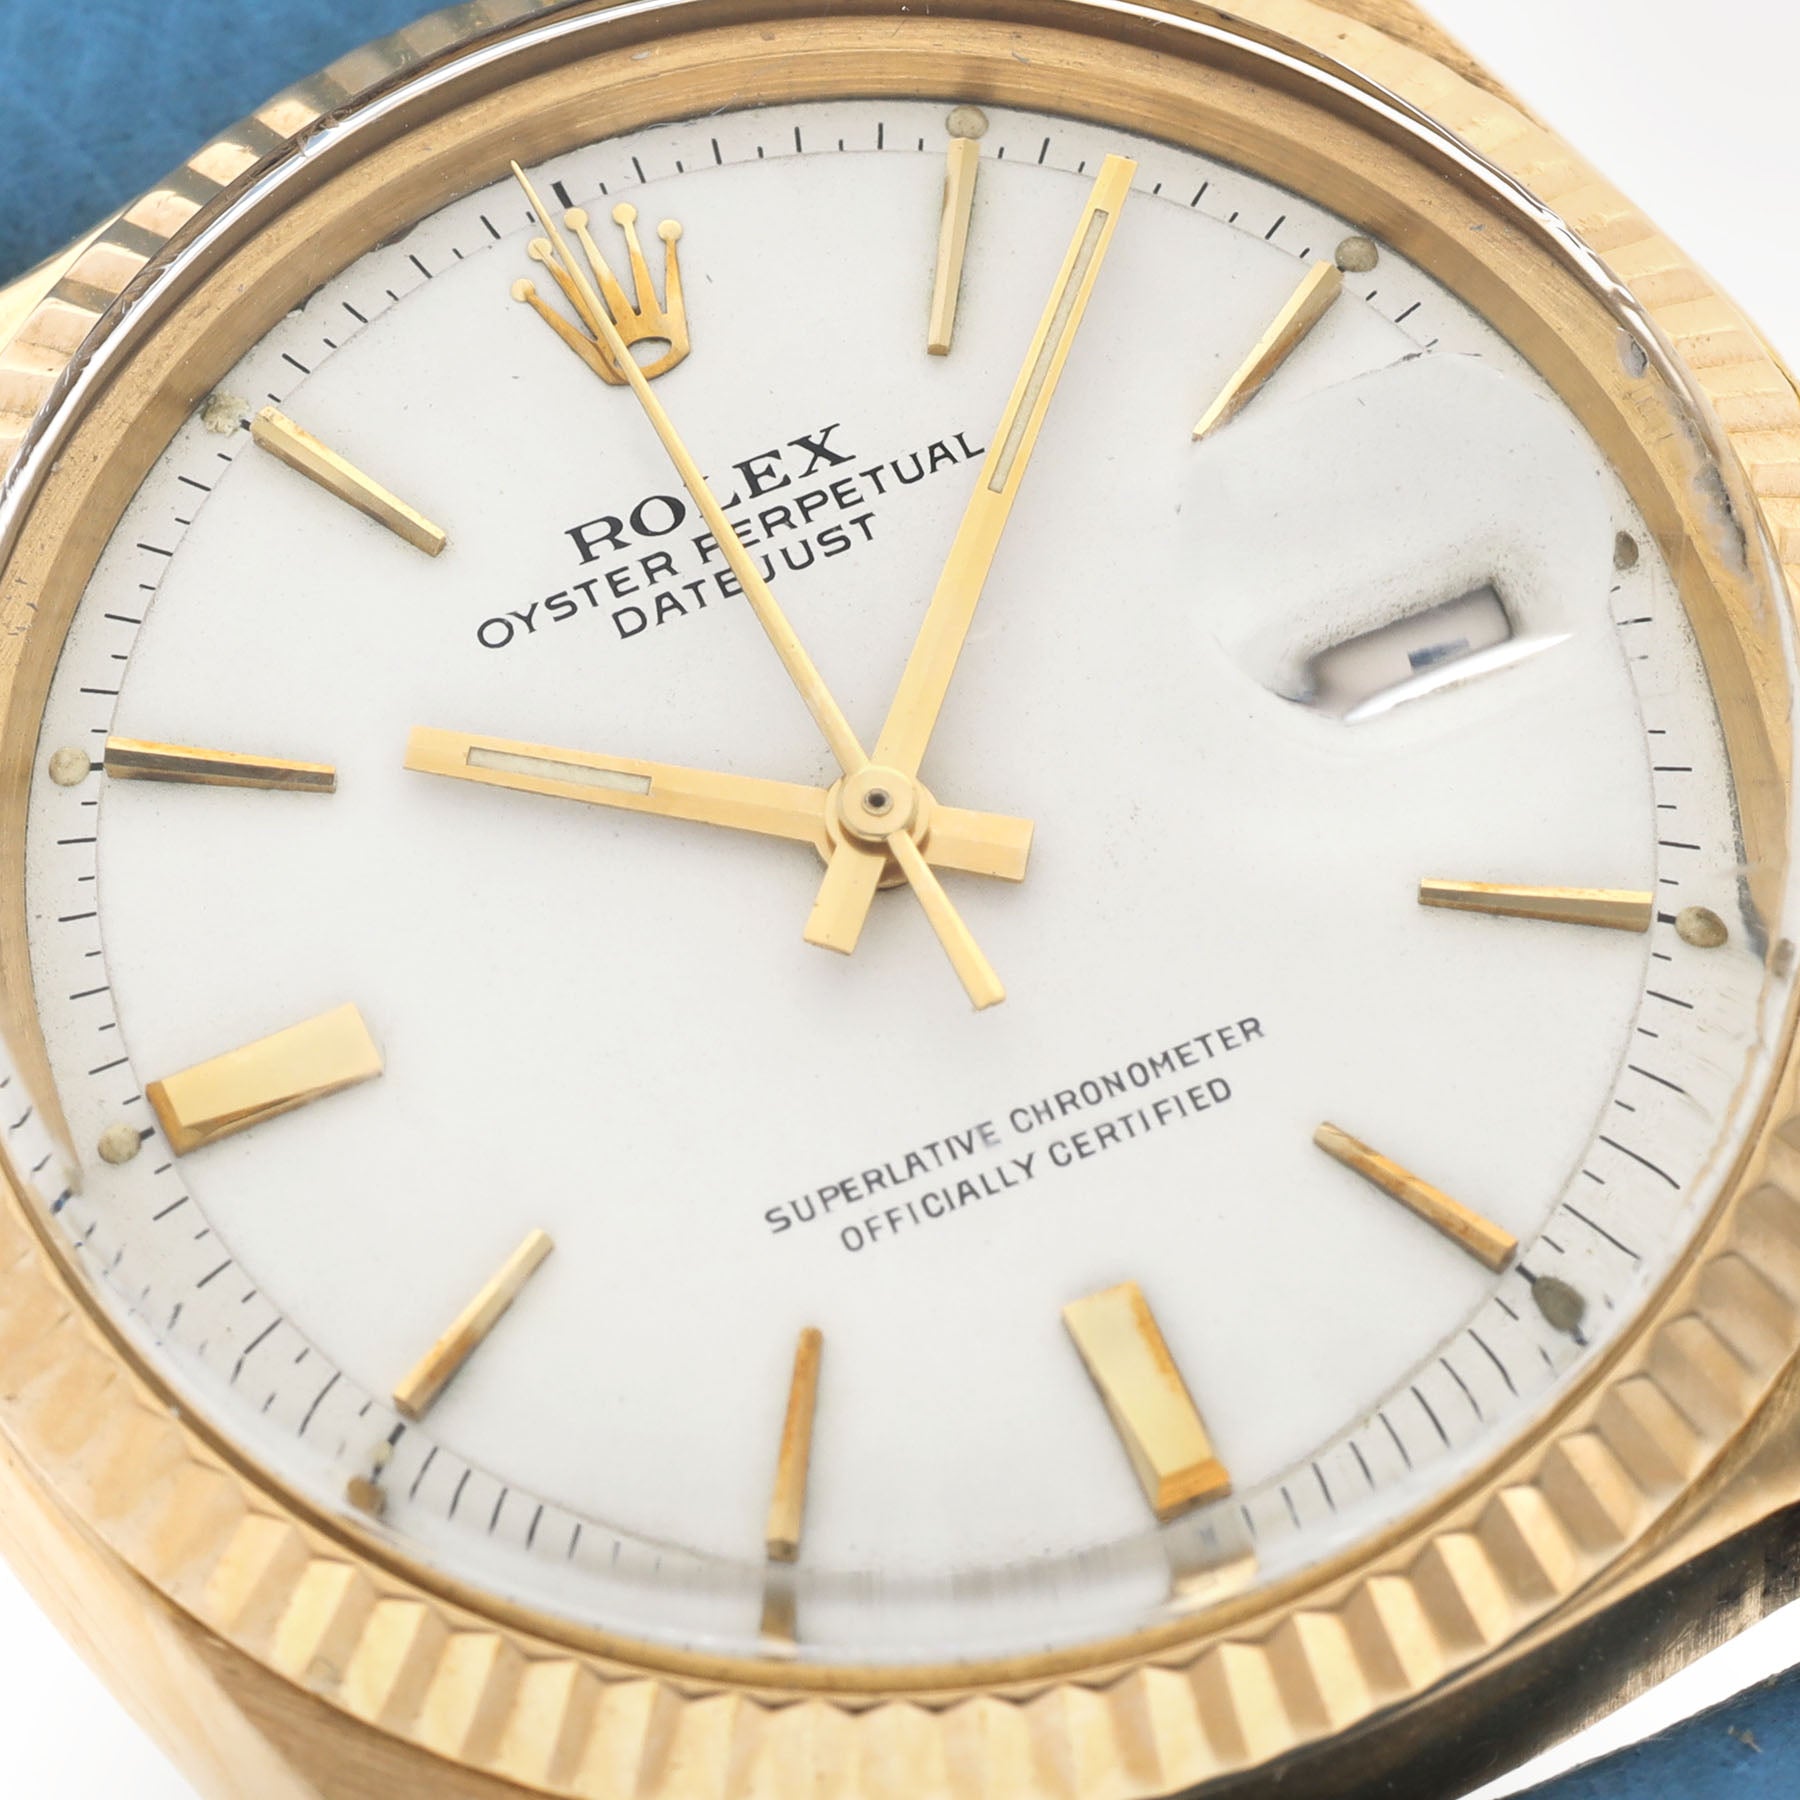 Rolex Datejust 1601 Yellow Gold White Dial ref 1601 